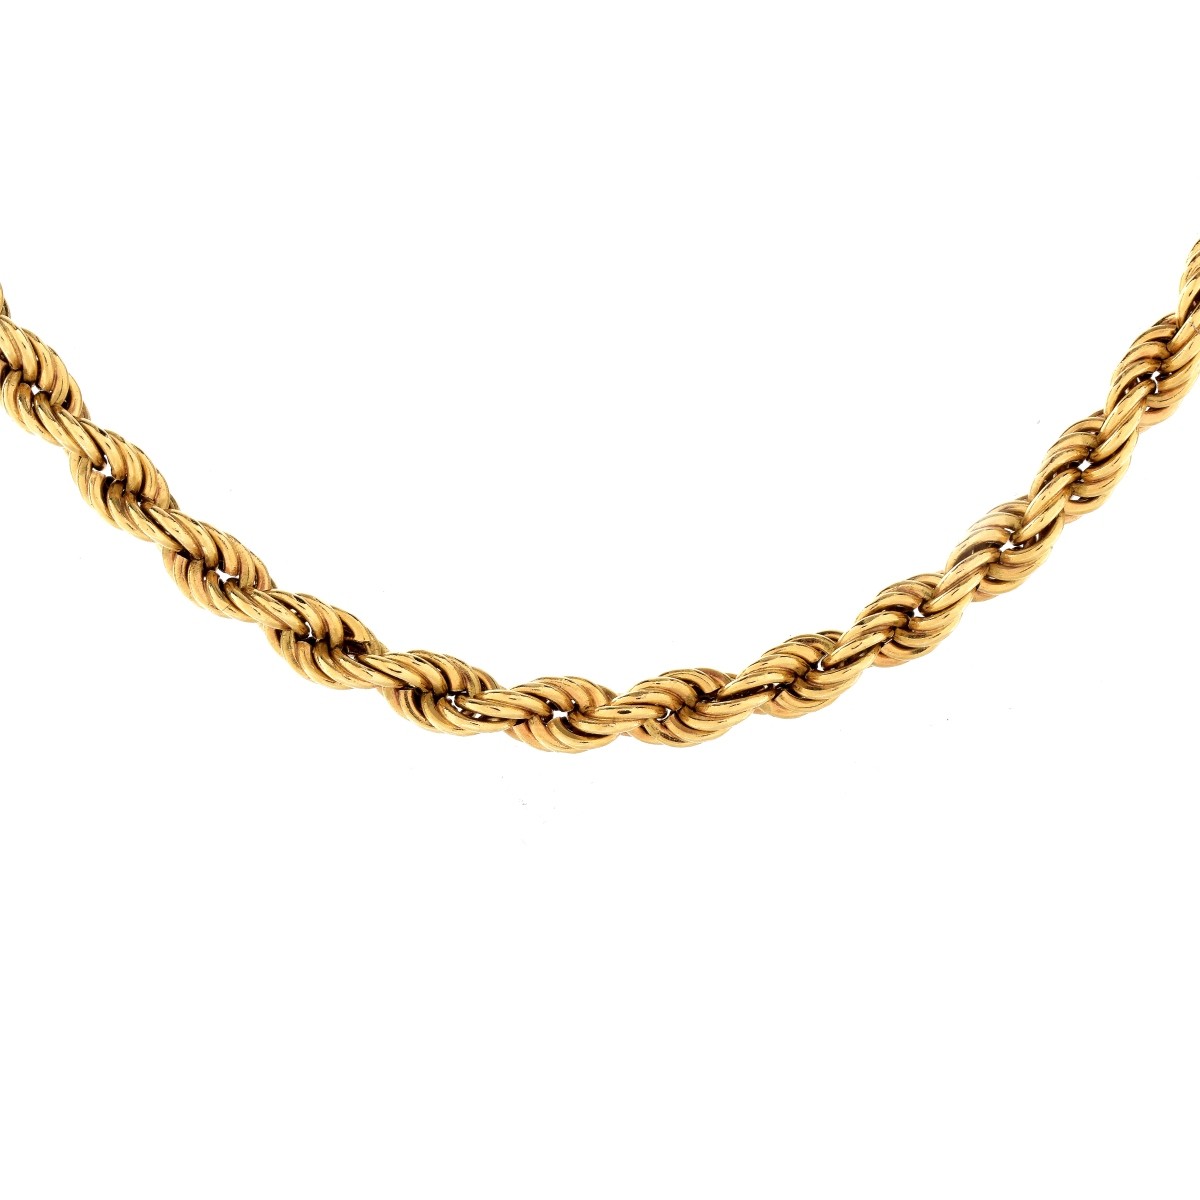 30" 14K Gold Rope Chain